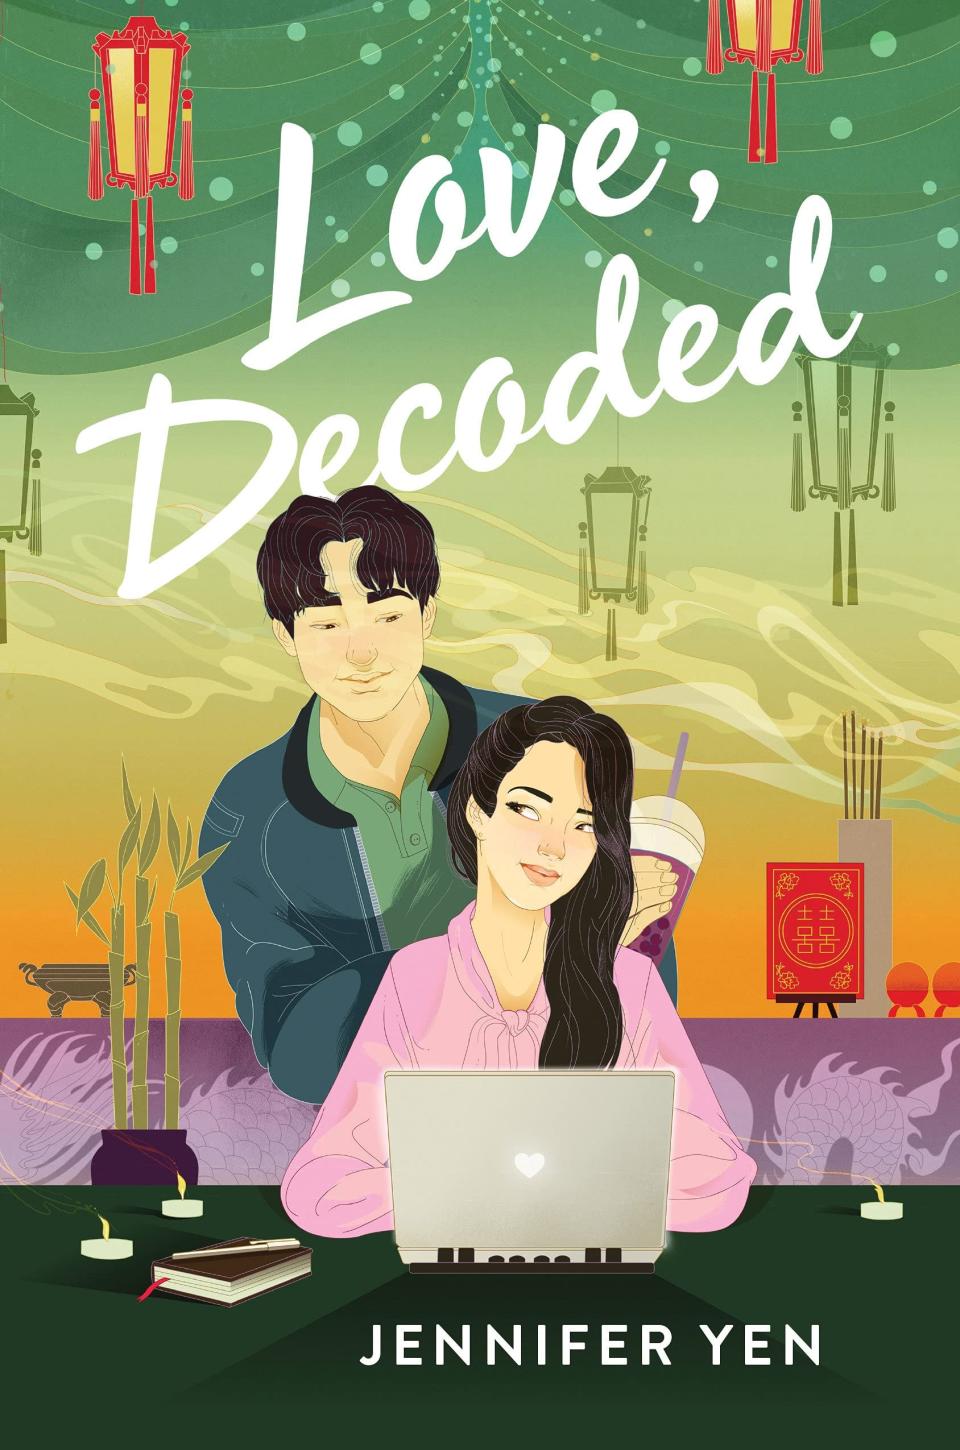 <p>Jennifer Yen gives Jane Austen's "Emma" a modern, YA update in <span>"Love, Decoded."</span> Everyone in Gigi Wong's life seems to expect her to succeed, and she'll do anything to live up to their expectations. That includes coding a friendship matchmaking app in hopes of securing a prestigious tech internship. Unfortunately for Gigi, her goal of helping others make friends quickly blows up in her face thanks to a series of misunderstandings and her app going viral at school. Now, Gigi not only has to work on repairing her friendships, she also has to try and salvage her project if she still wants to land her dream gig.</p> <p><em>Release date: March 8</em></p>